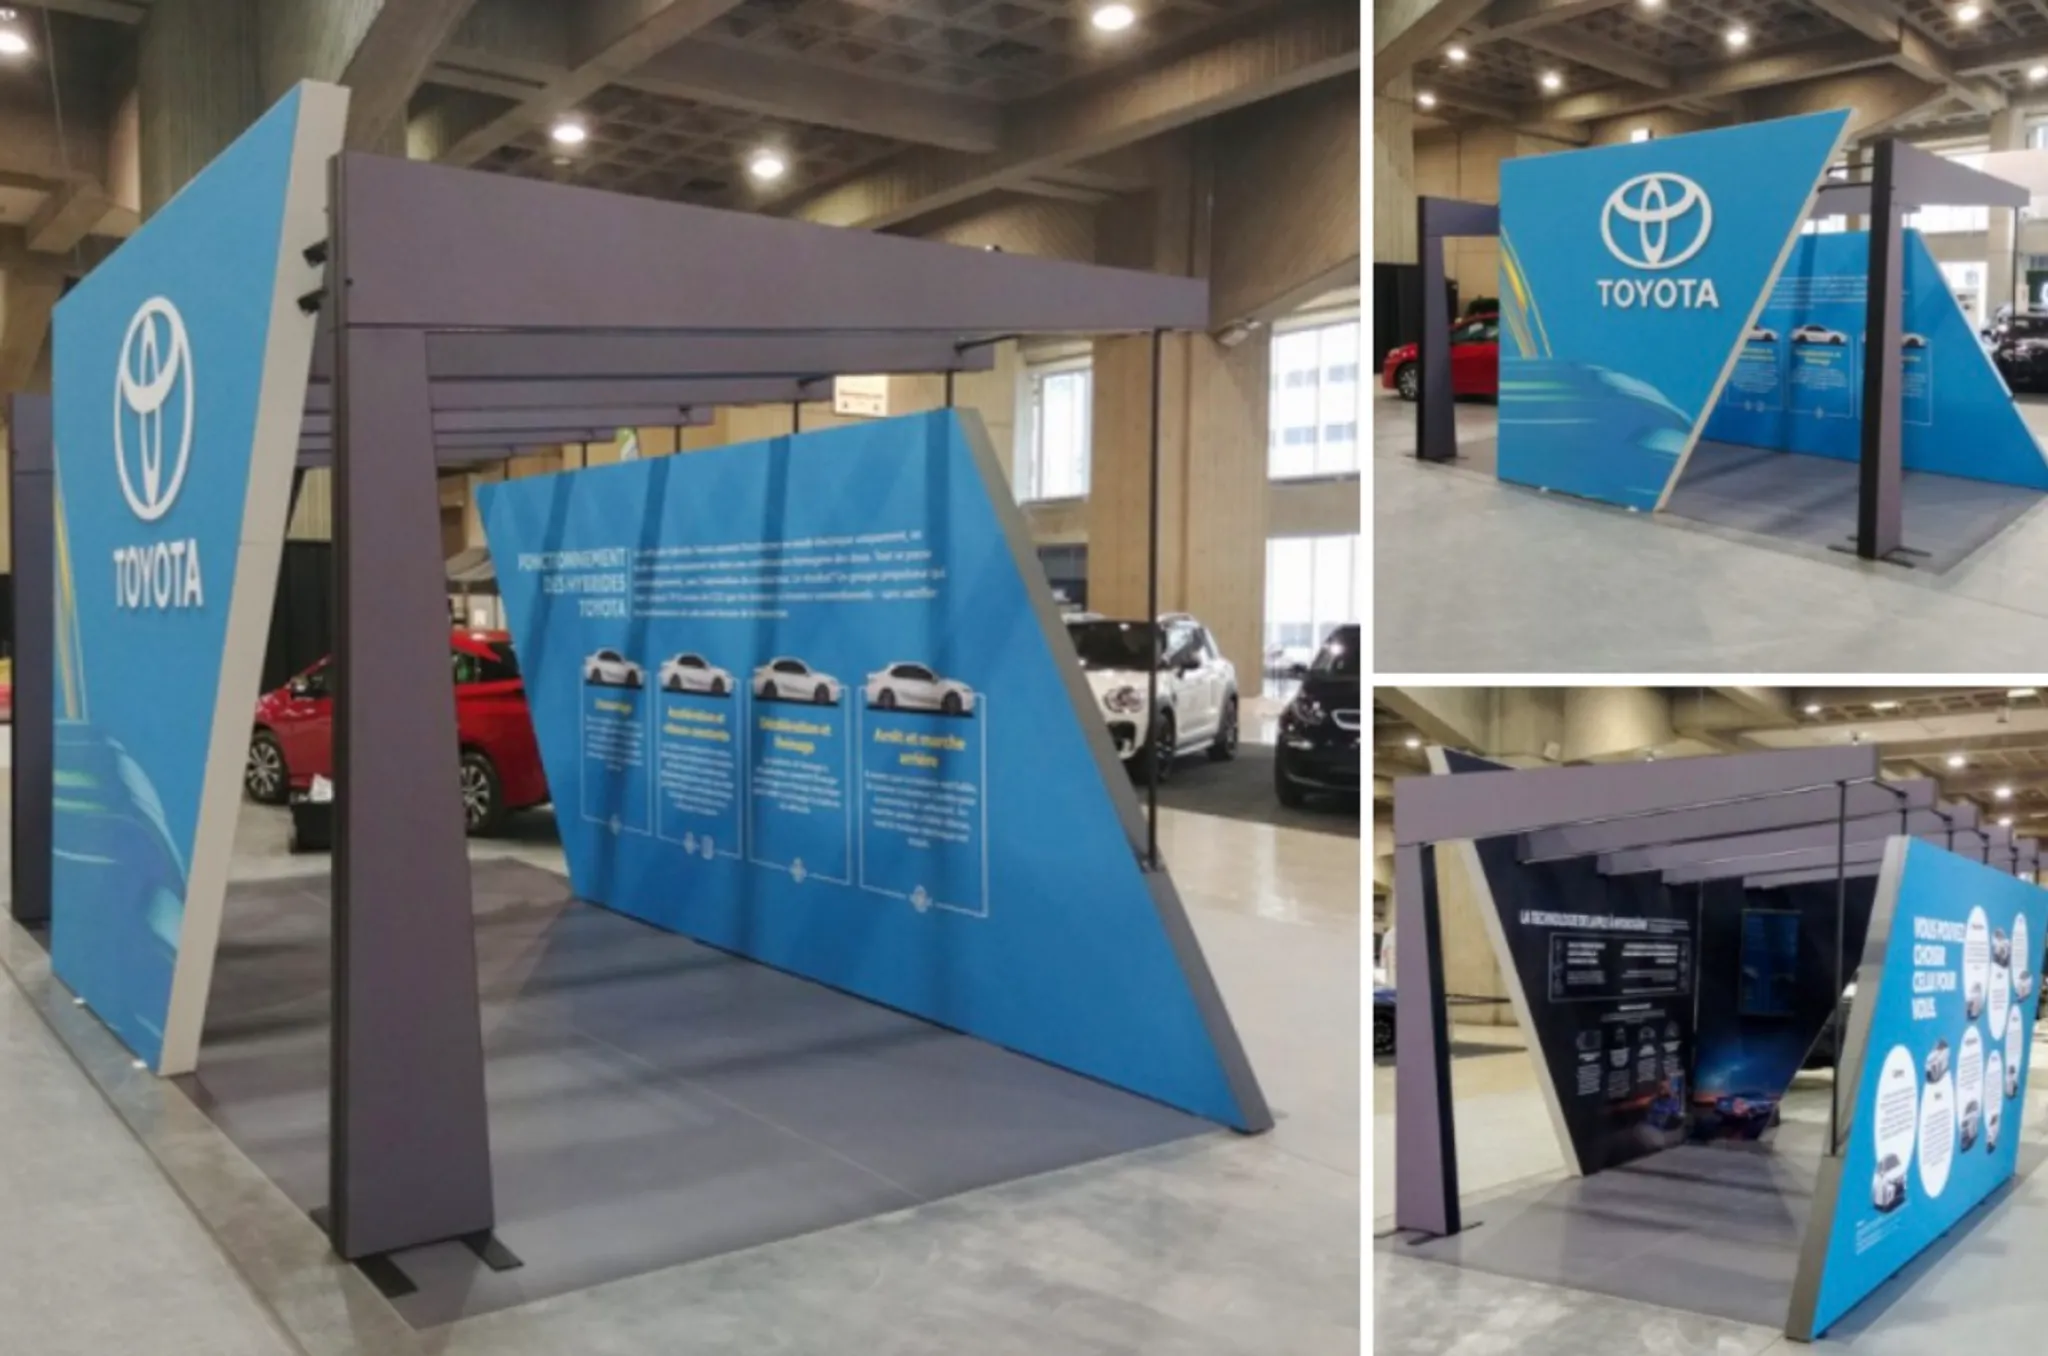 PNH Exhibition Stand example